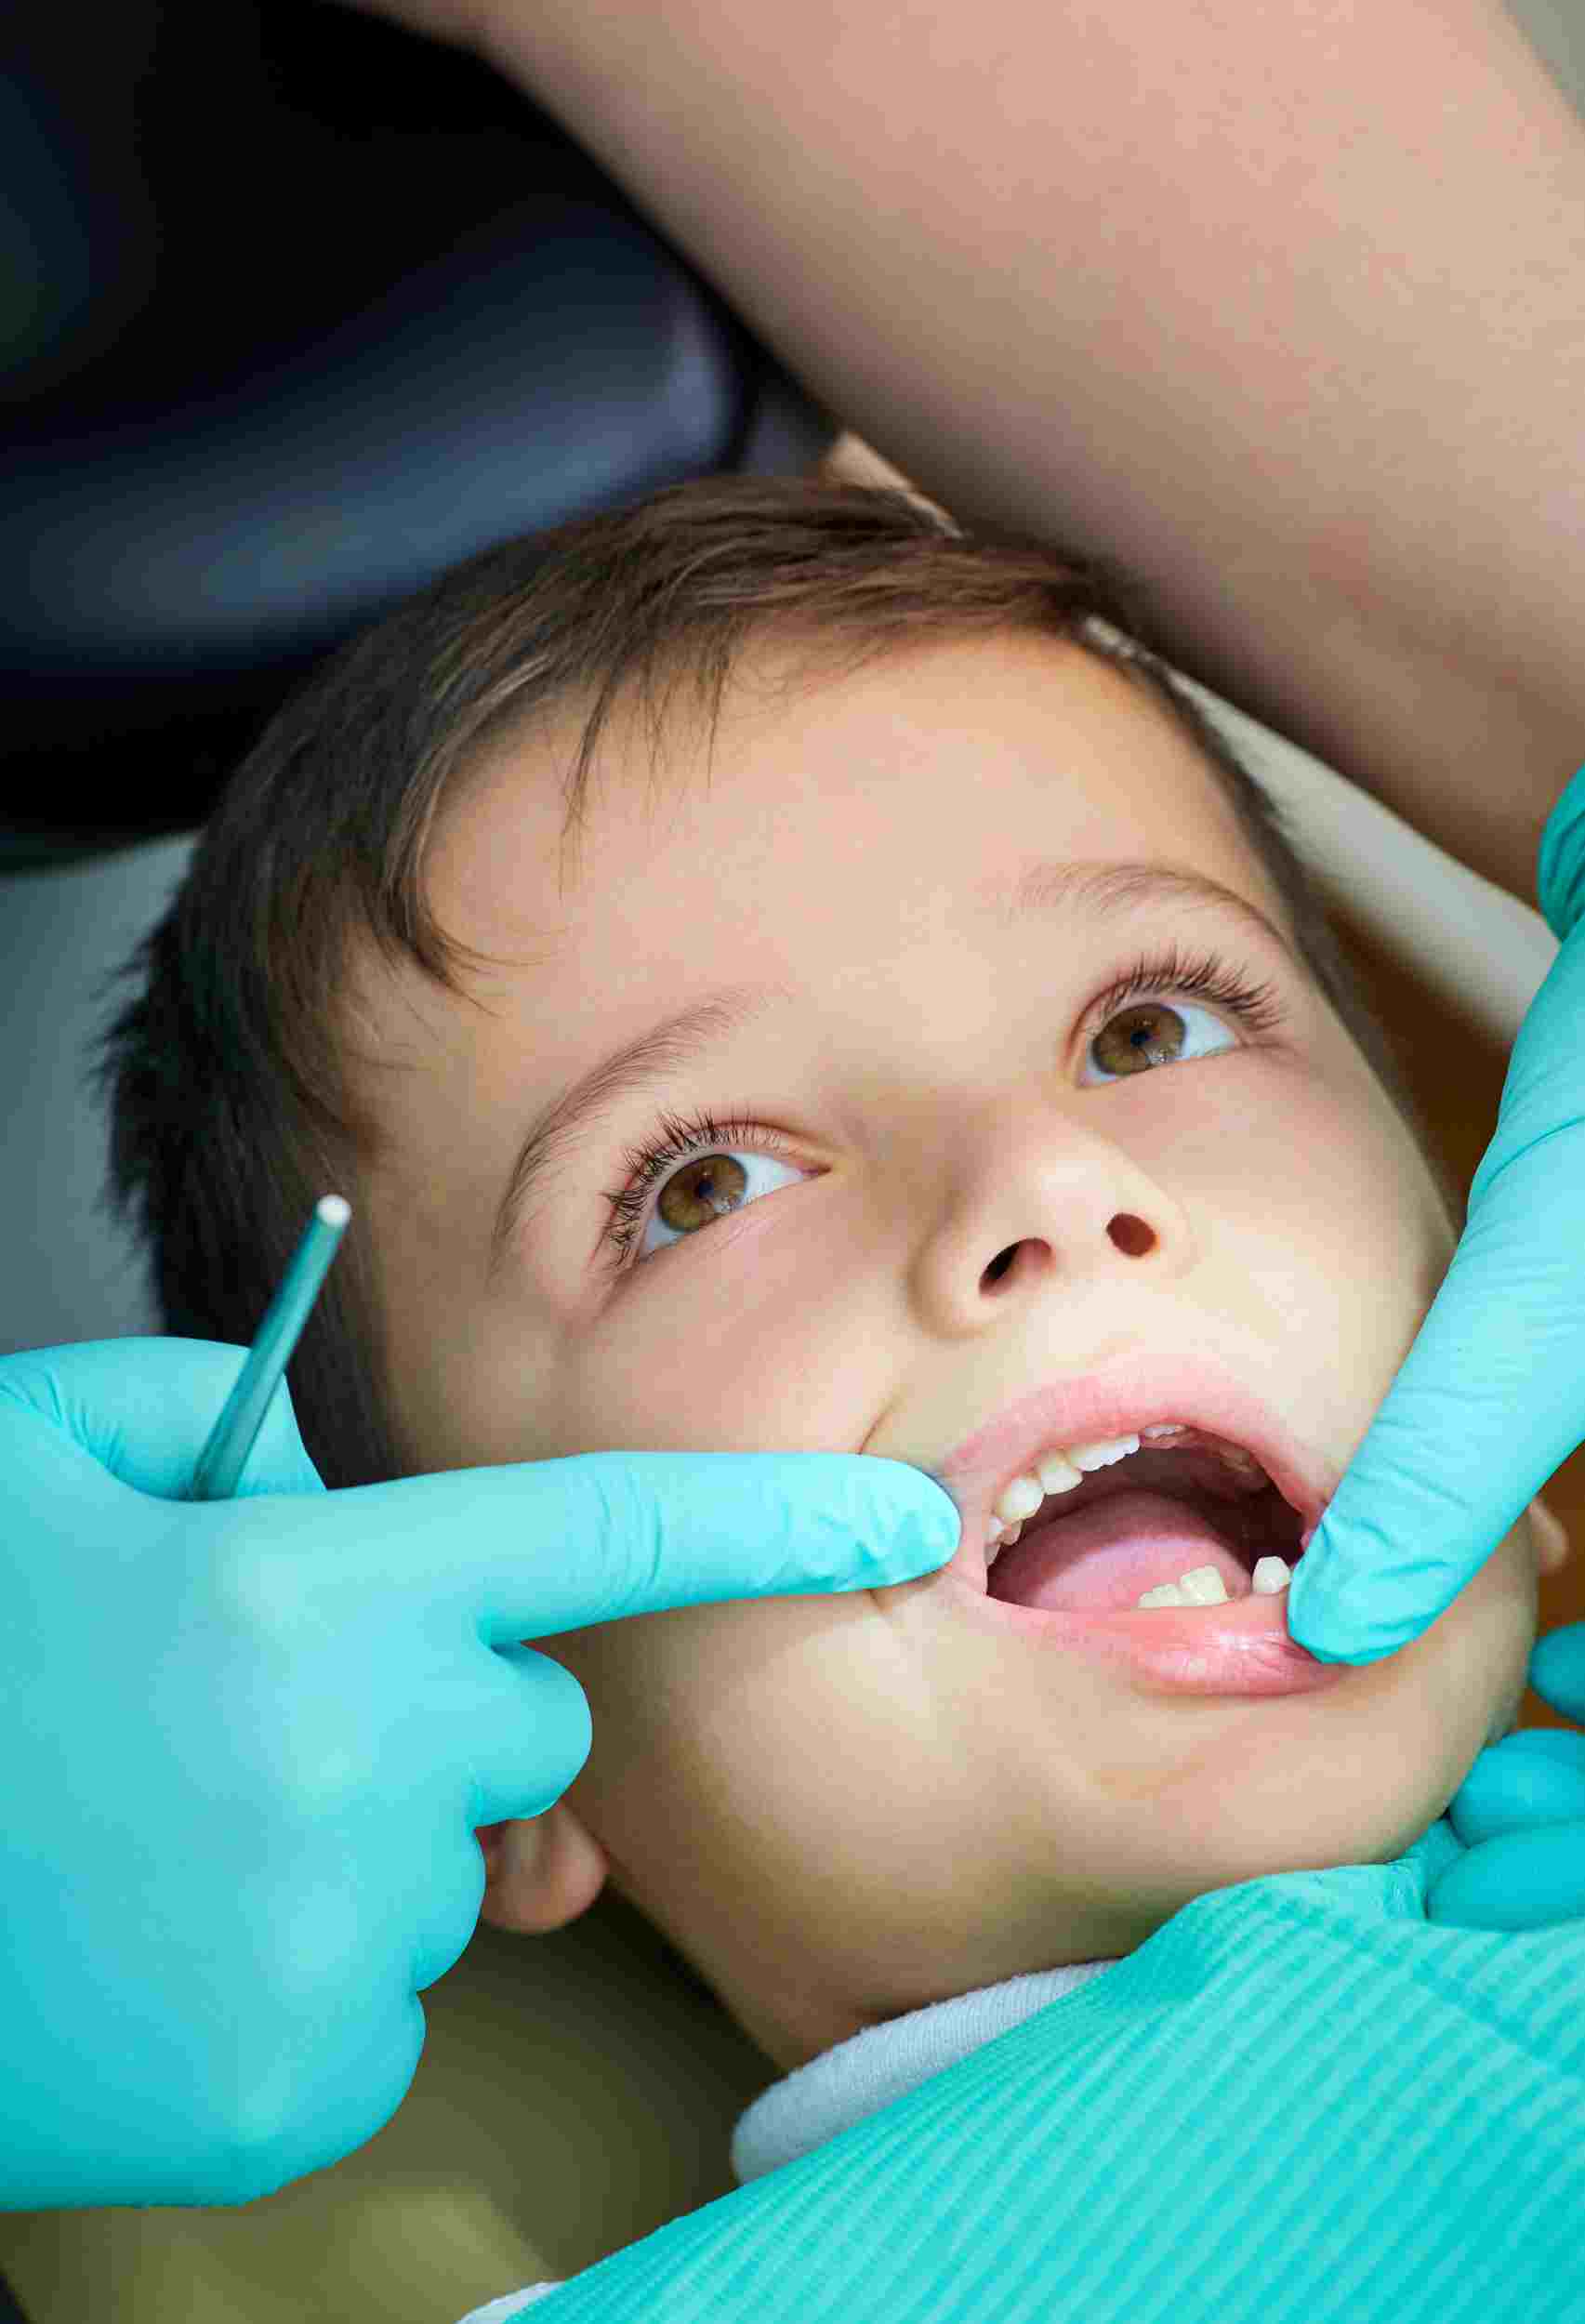 Protecting Little Smiles 7 Pediatric Dental Care Blunders Parents Should Avoid